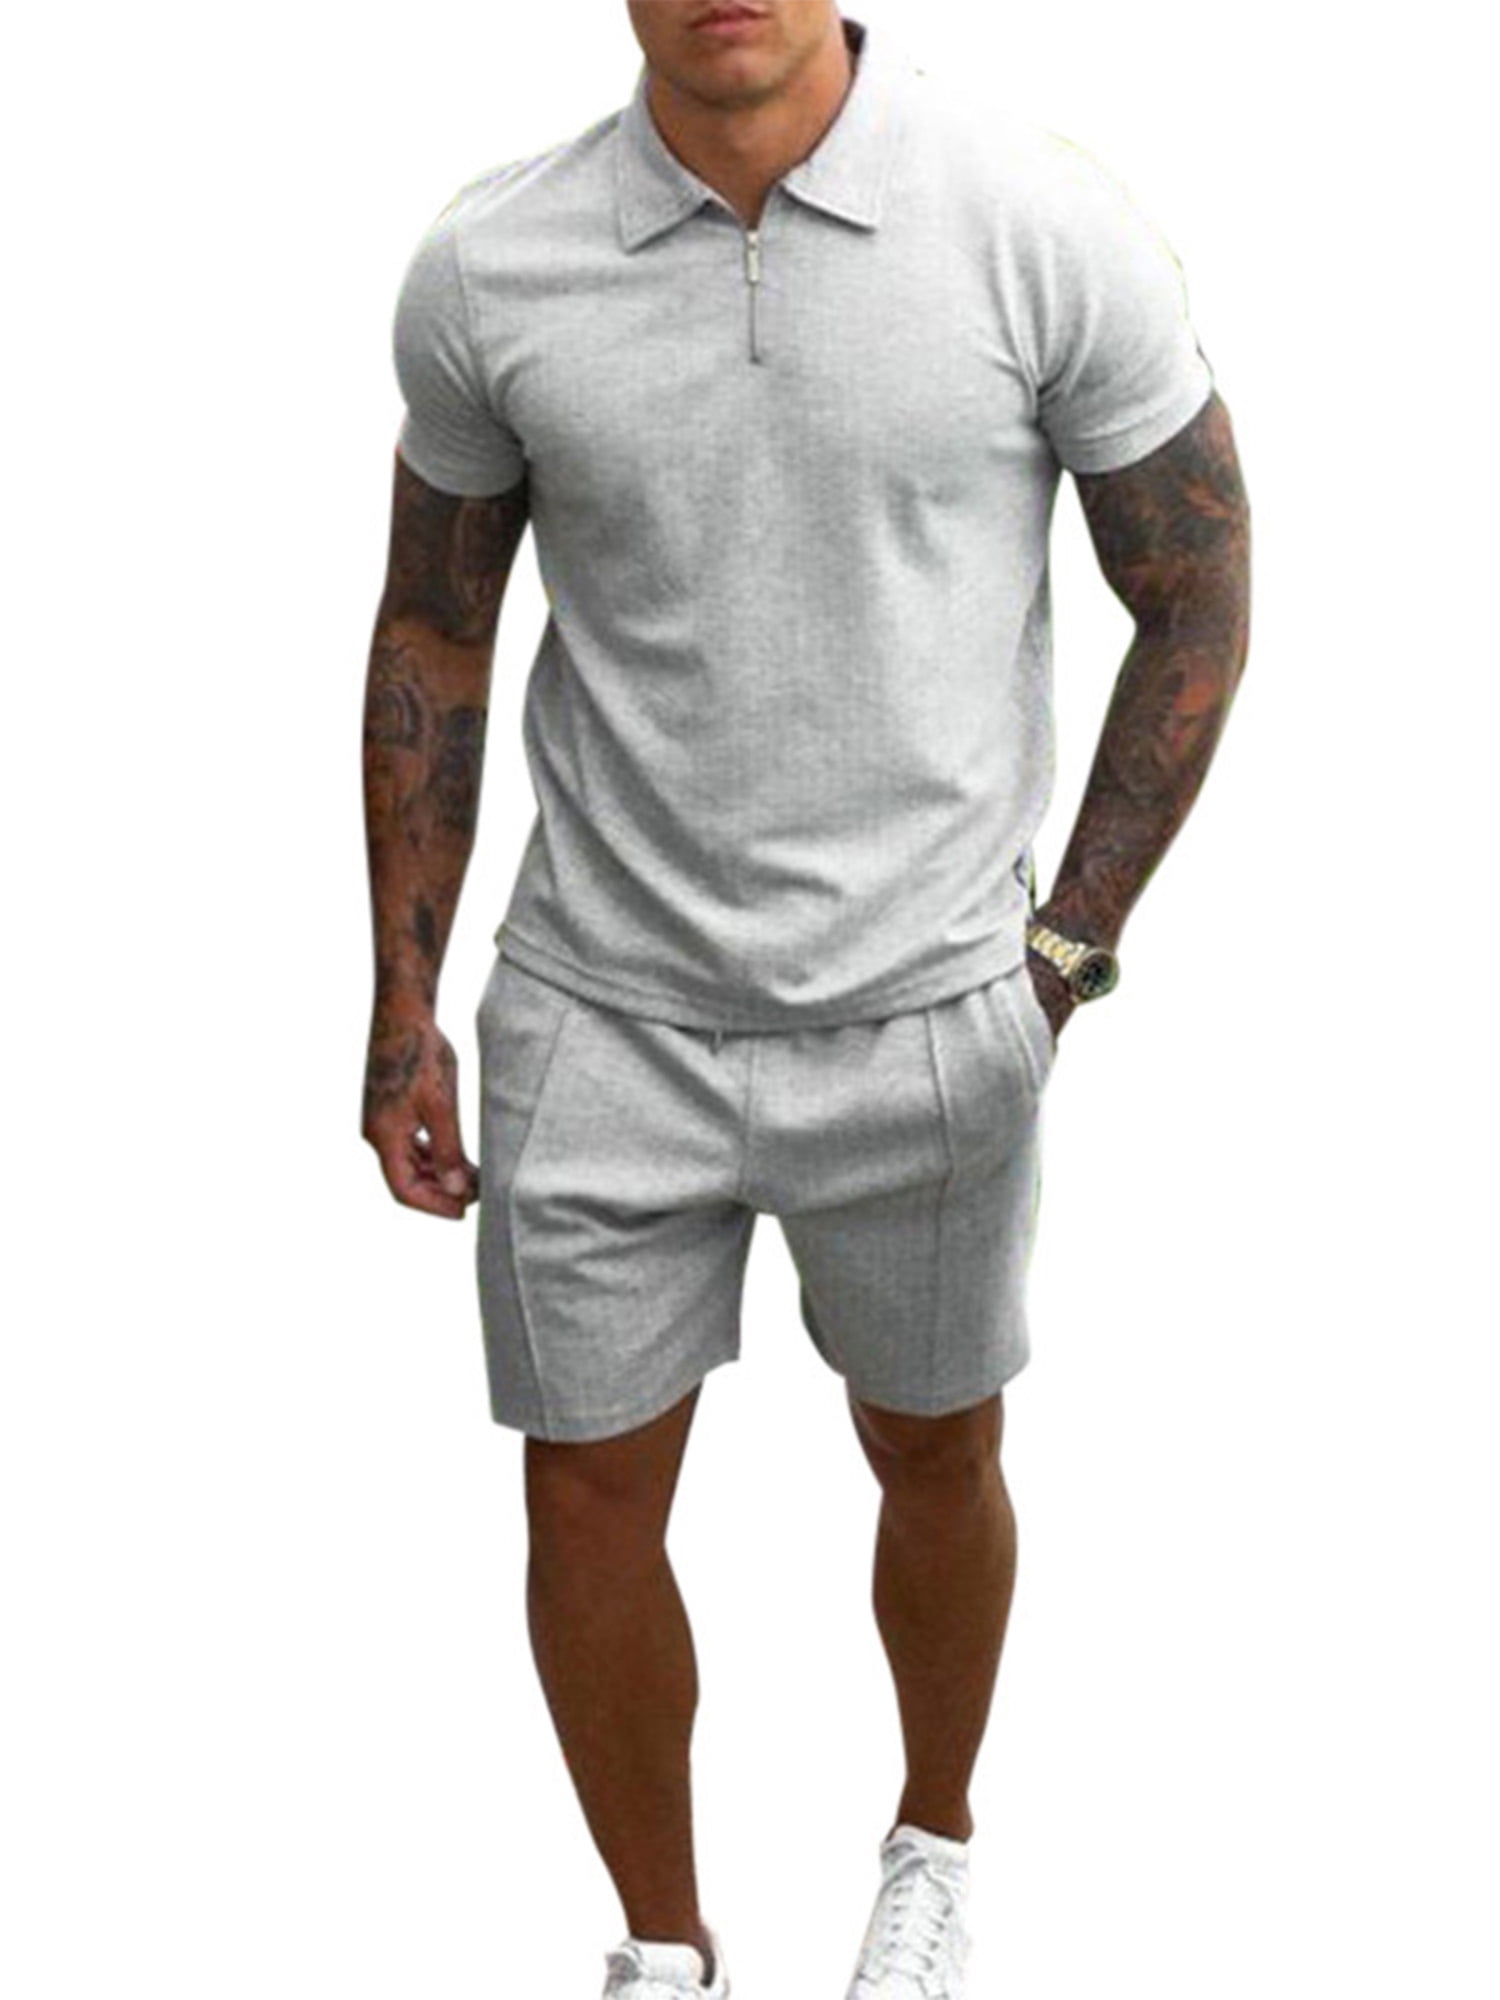 Details about   Men Tracksuit Short Sleeve Jogging Casual Sports T-Shirts and Shorts 2 Piece Set 